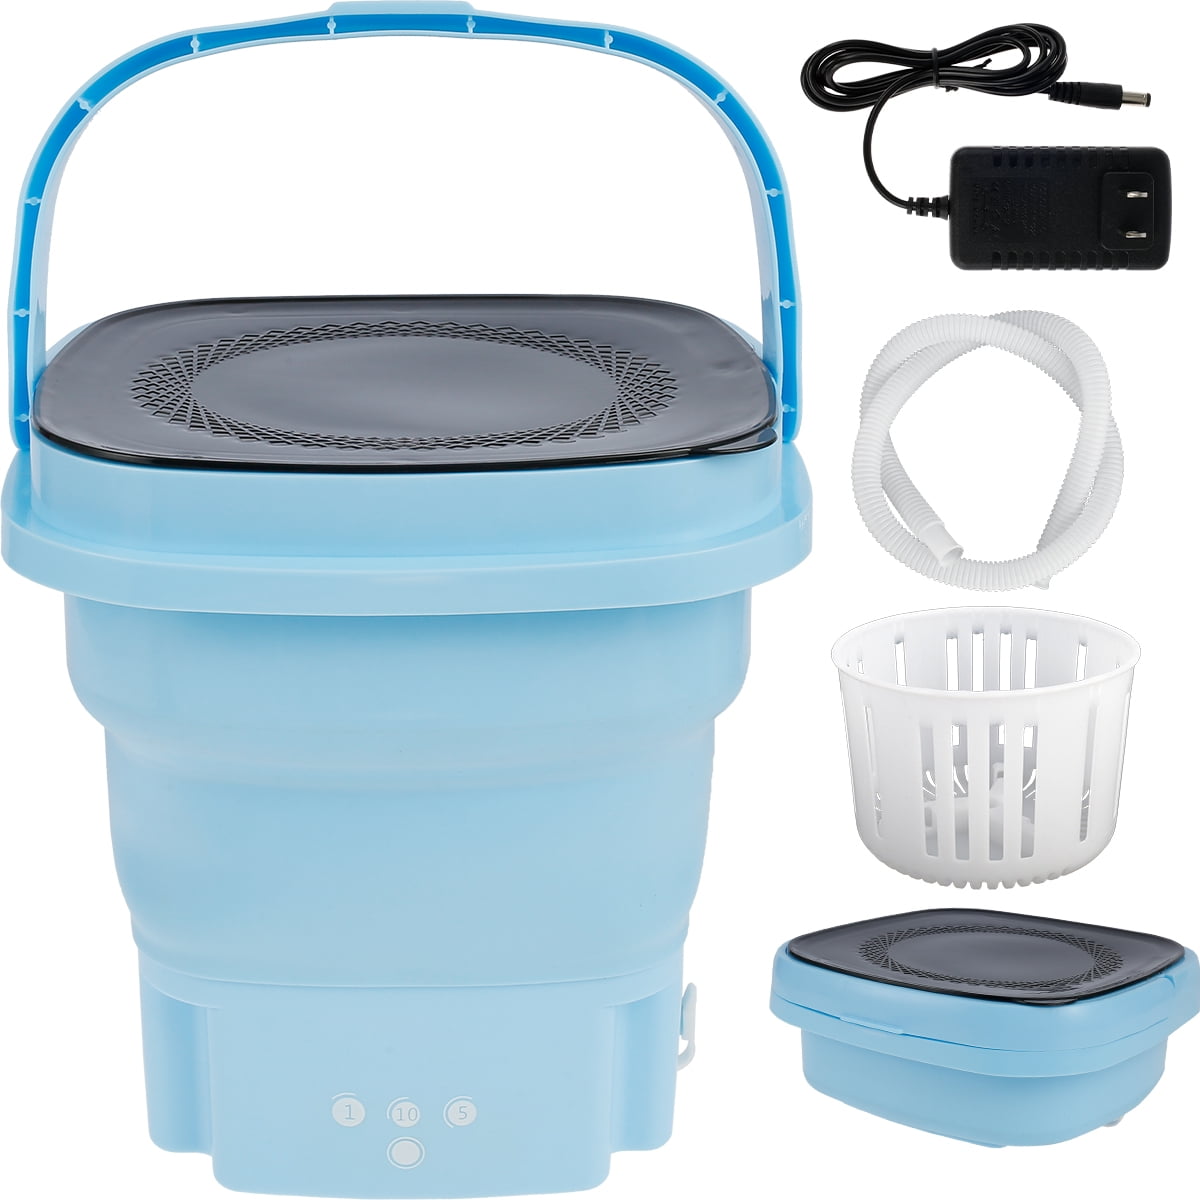 Ztoo Foldable Washing Machine Mini Portable Washing Machine with Drain Basket Lightweight Washer 3 Speed Timing Reusable for Baby Clothes Underwear